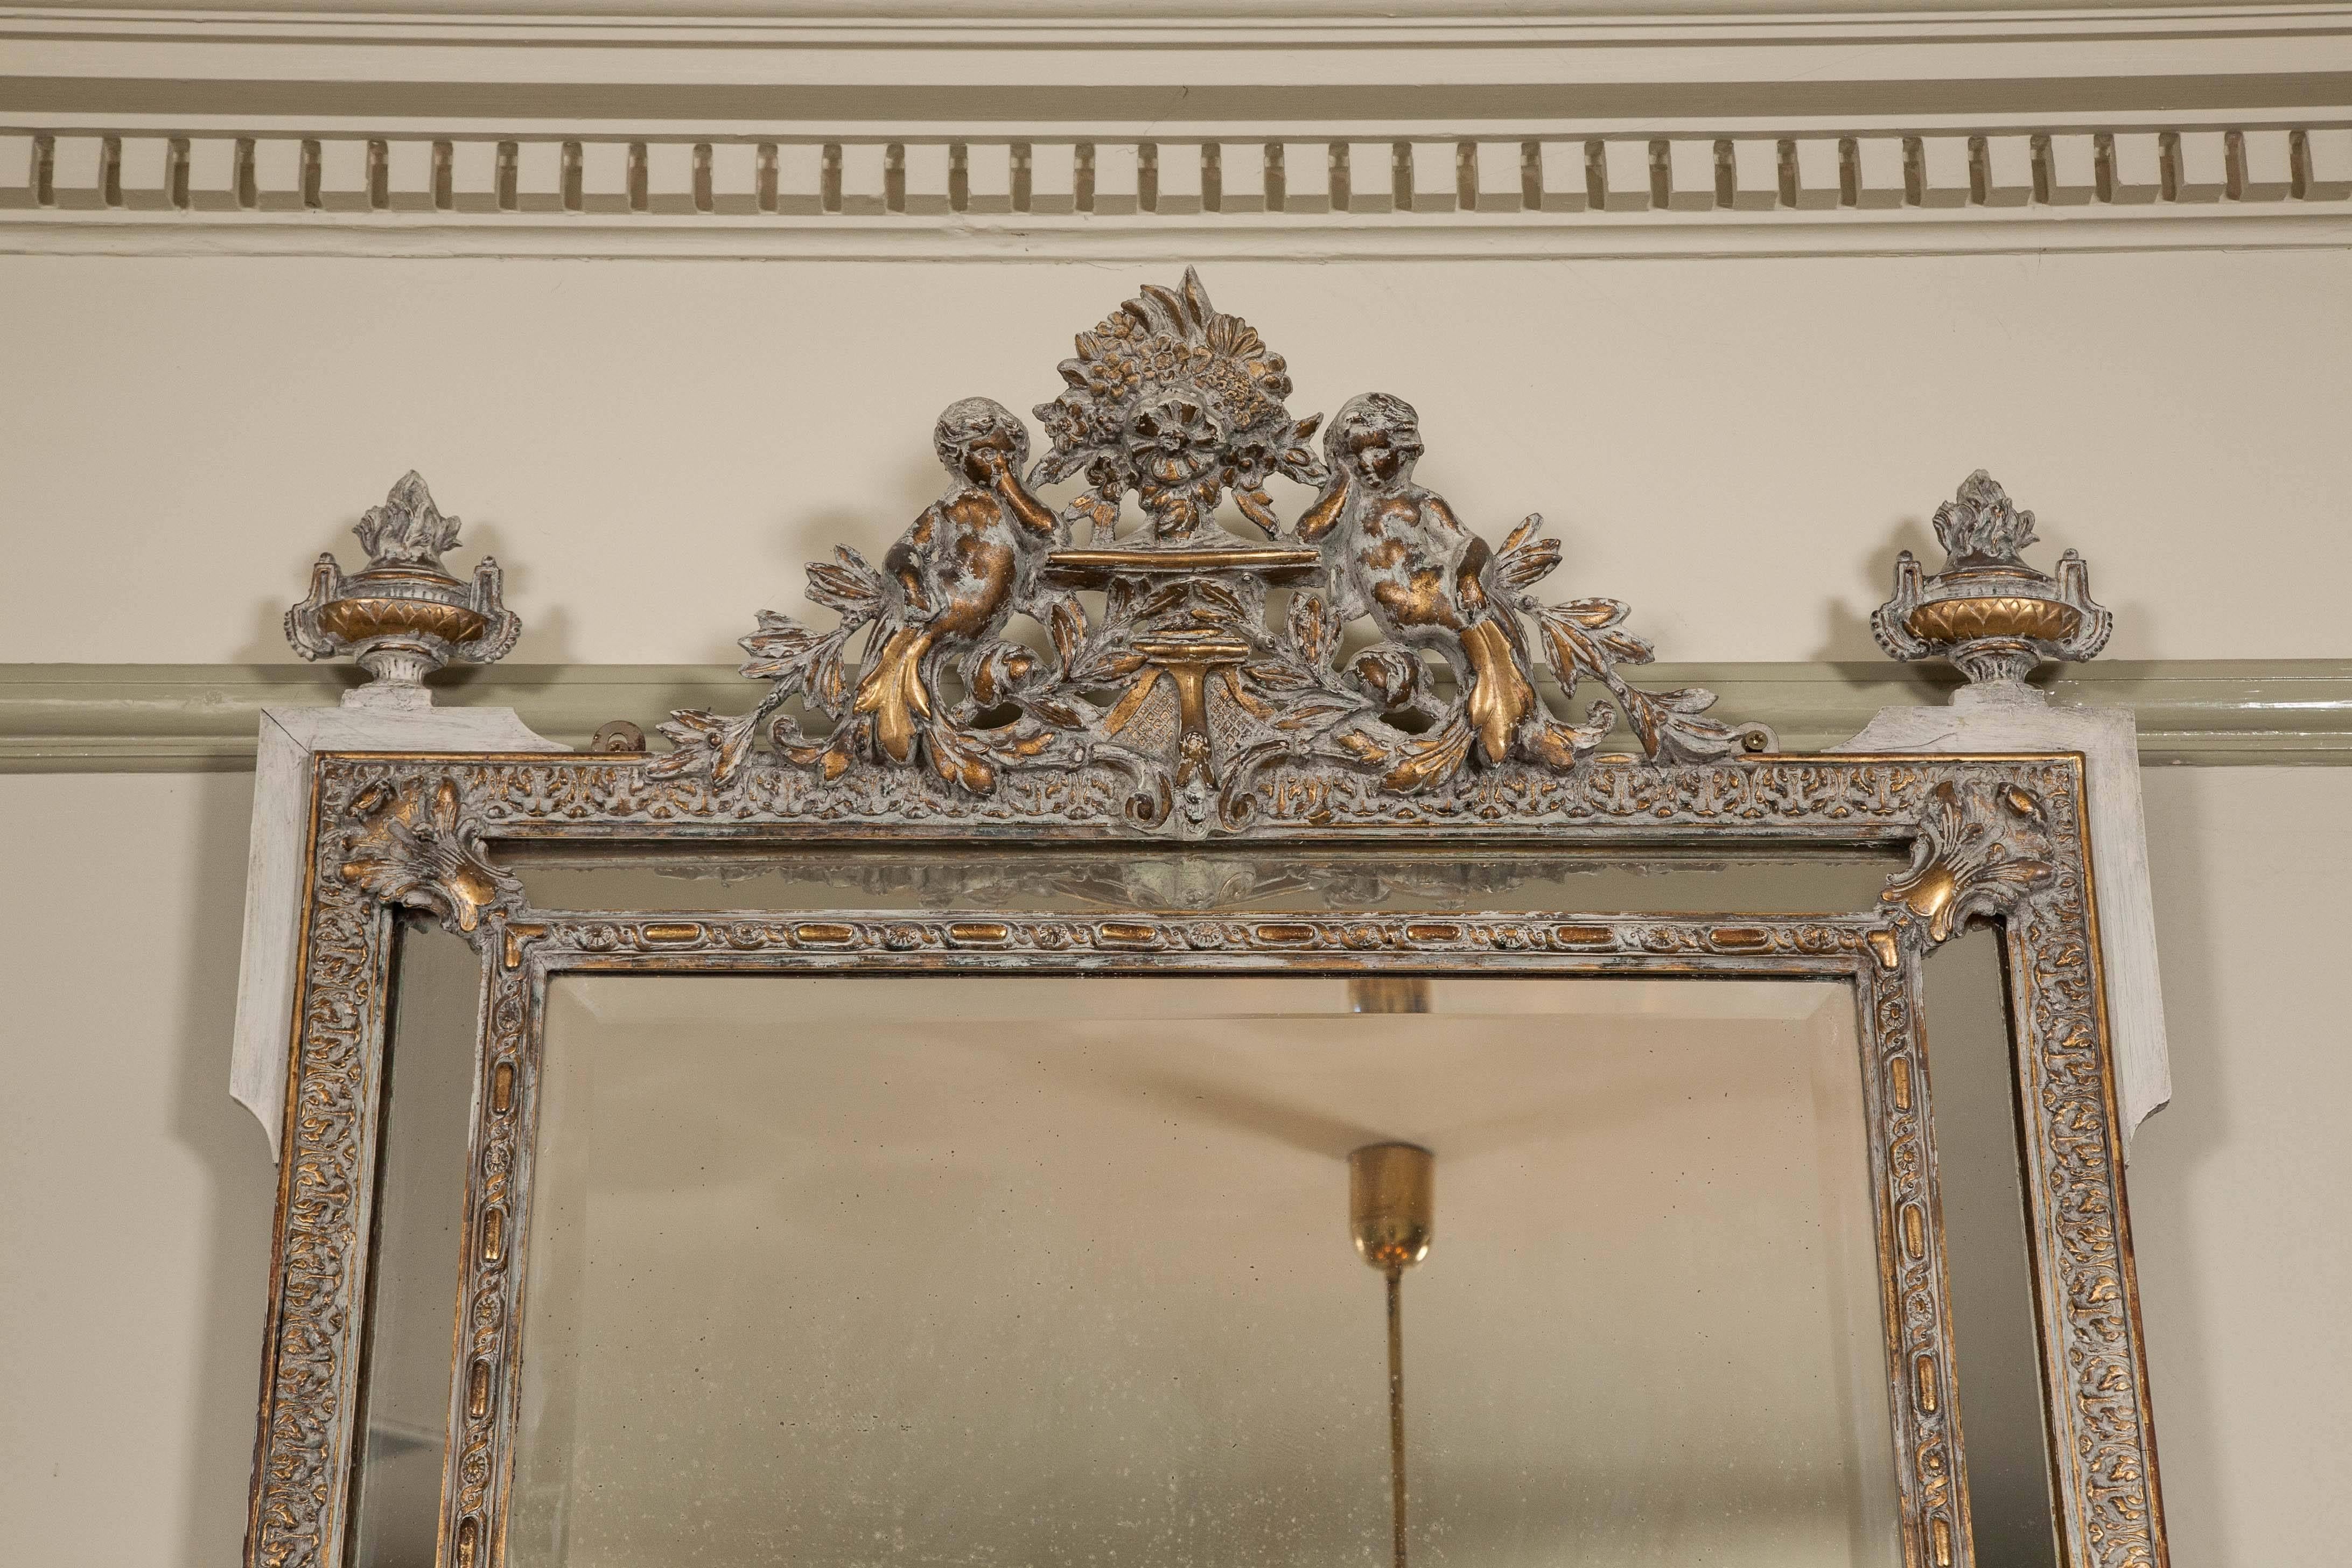 Glamorous and impactual pair of ornate mirrors featuring a double frame and an ornate design at the top.
 